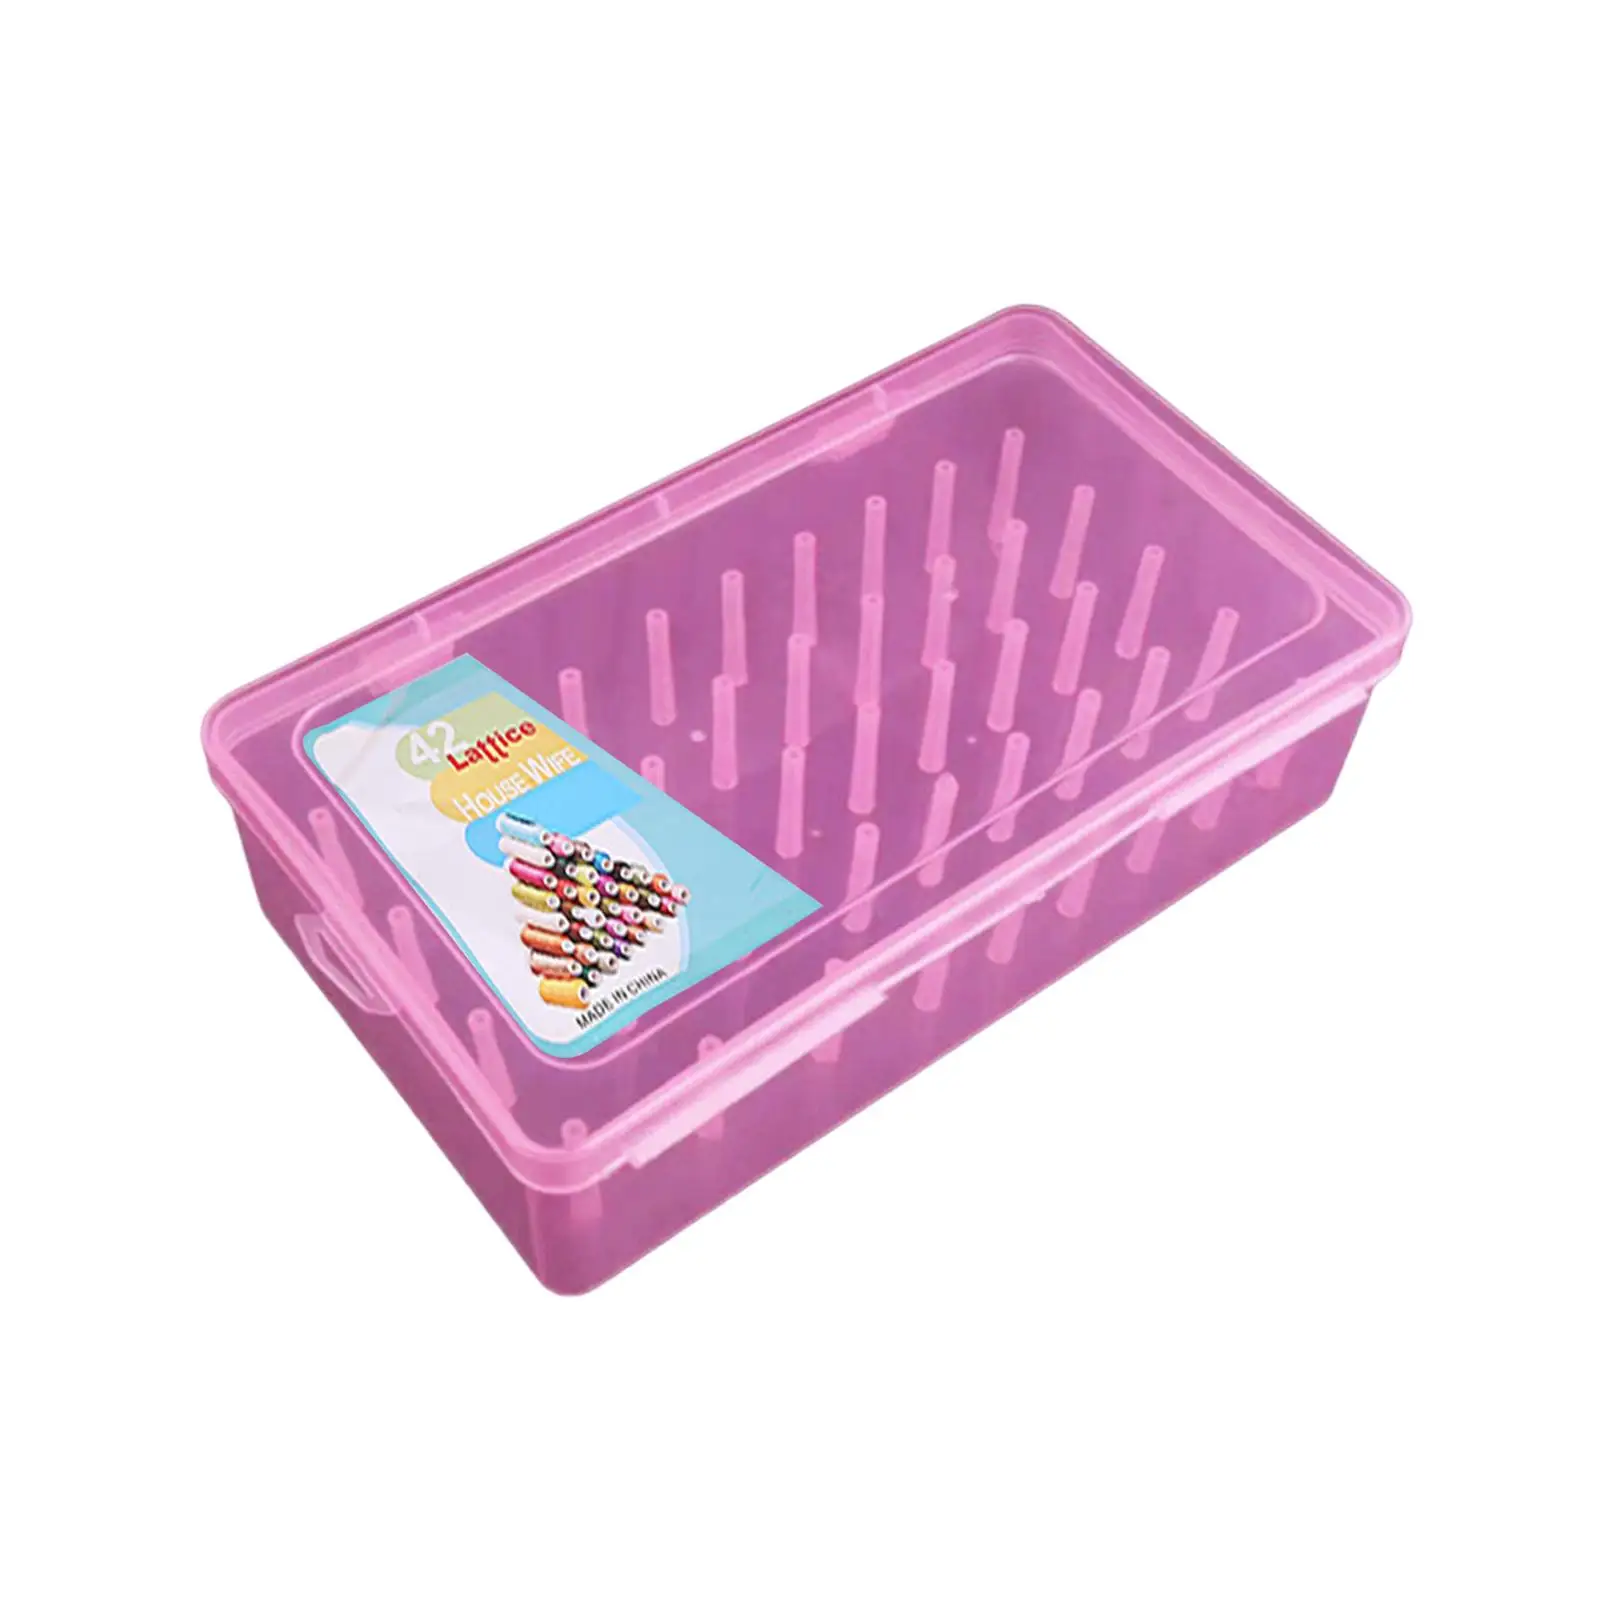 Sewing Thread Storage Box Transparent 42 Embroidery Thread Organiser for